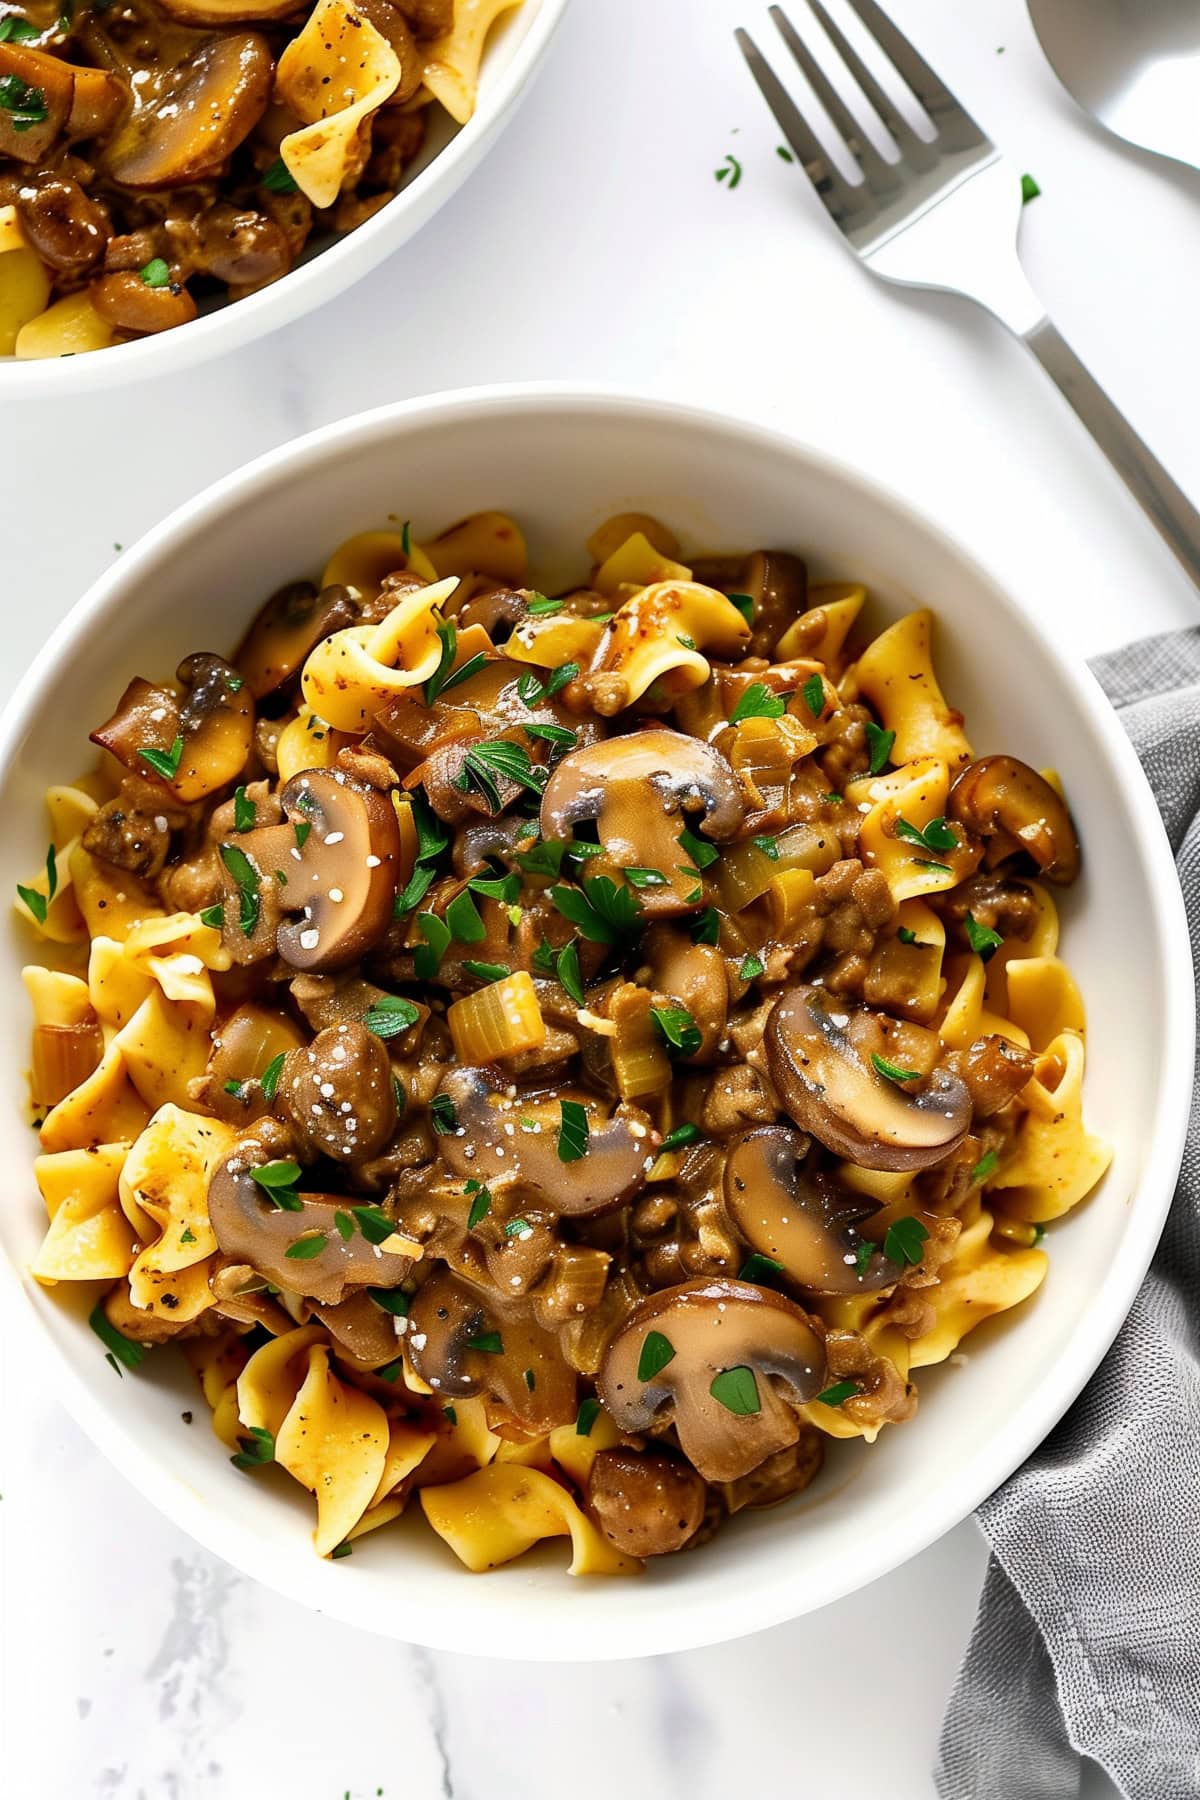 Mushroom stroganoff served in a white bowl, showcasing the creamy sauce with a fork ready to dig in.